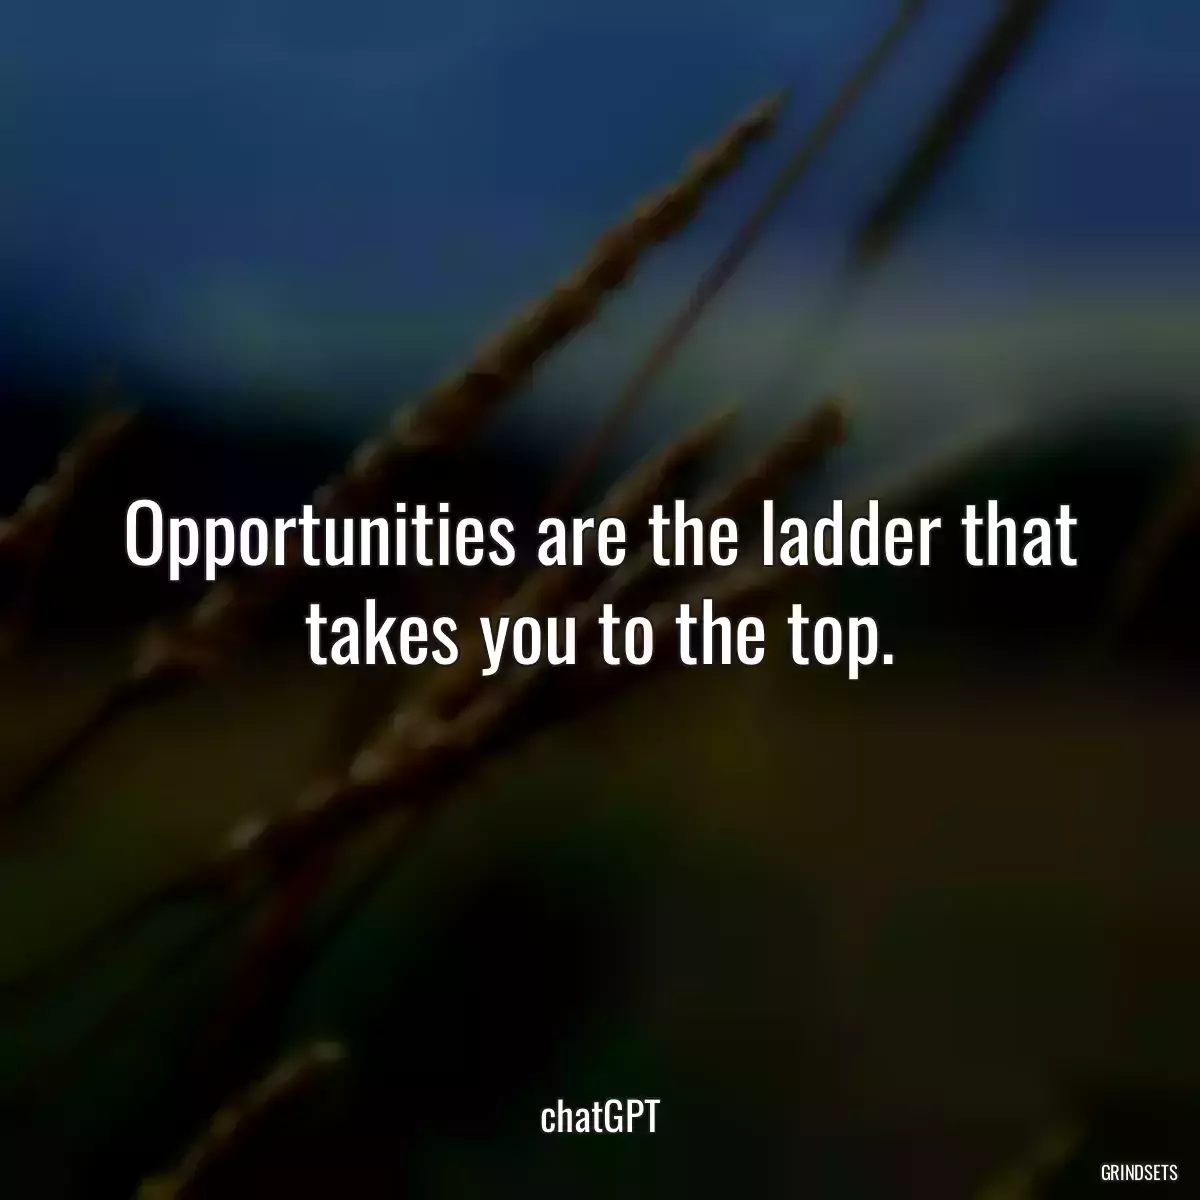 Opportunities are the ladder that takes you to the top.